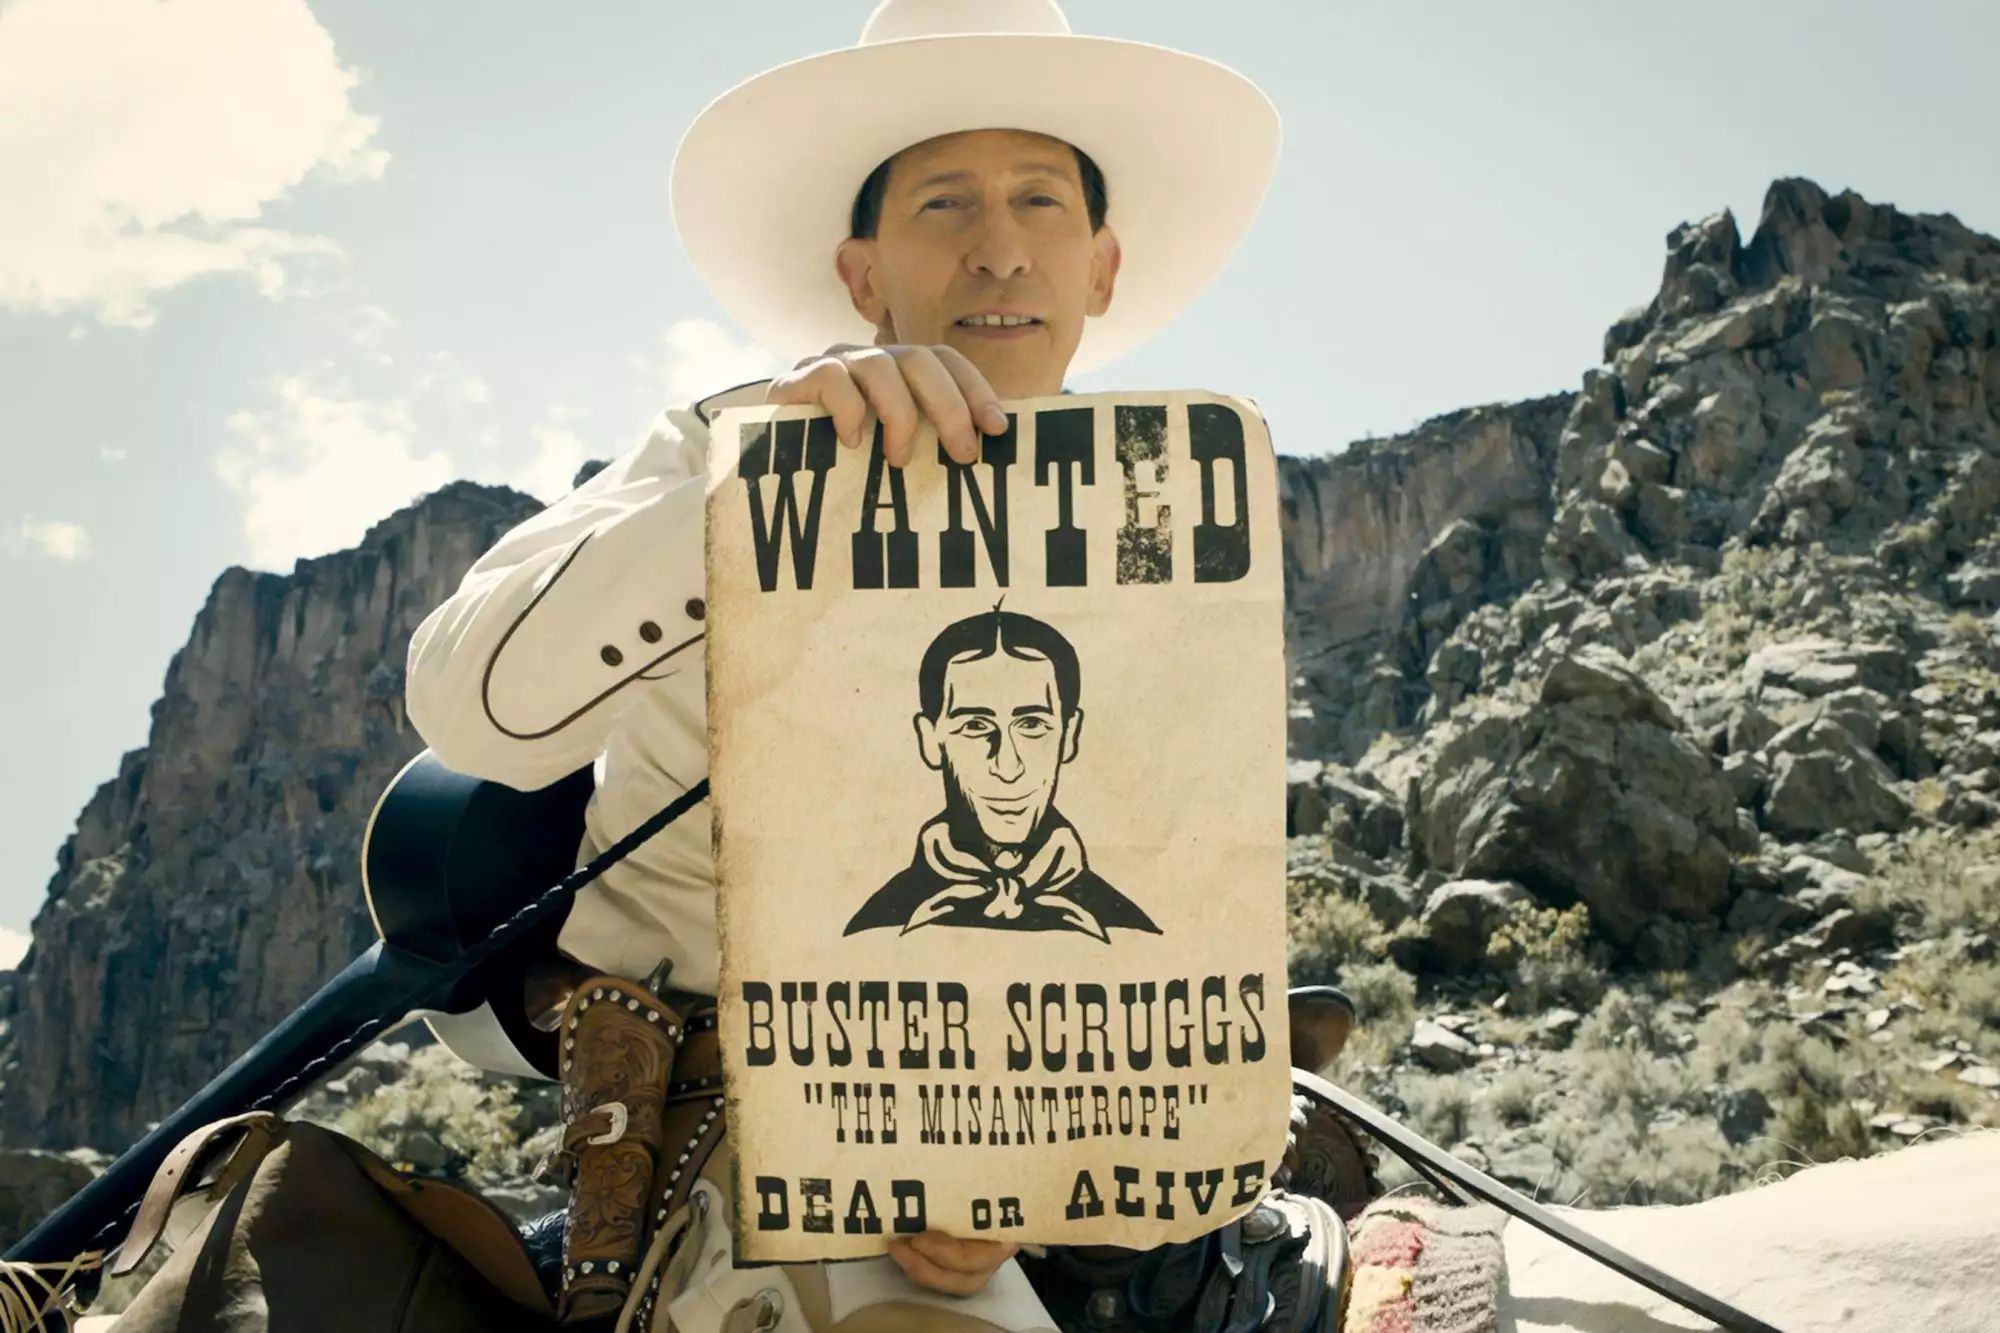 34-facts-about-the-movie-the-ballad-of-buster-scruggs